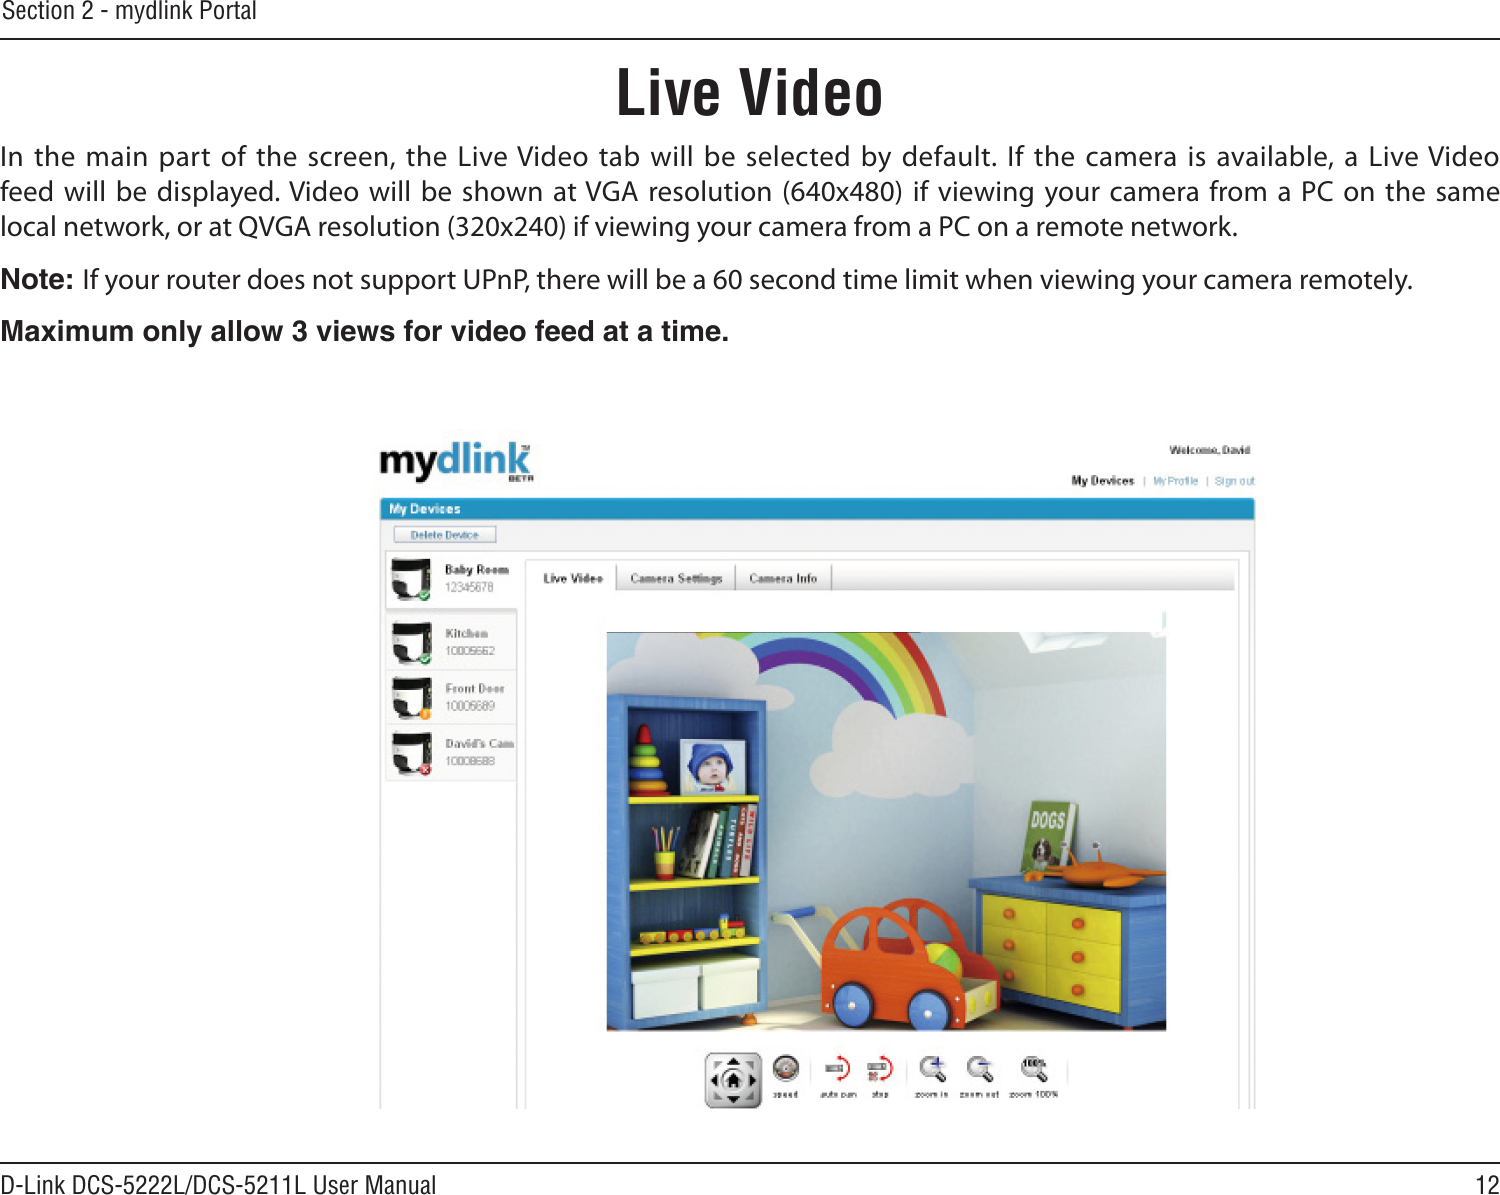 12D-Link DCS-5222L/DCS-5211L User ManualSection 2 - mydlink PortalLive VideoIn the main  part of the screen, the  Live Video tab will be selected by default.  If the camera is available, a Live Video feed will  be  displayed. Video will be shown at VGA  resolution (640x480) if viewing your camera from a  PC on the same local network, or at QVGA resolution (320x240) if viewing your camera from a PC on a remote network.Note: If your router does not support UPnP, there will be a 60 second time limit when viewing your camera remotely. Maximum only allow 3 views for video feed at a time.